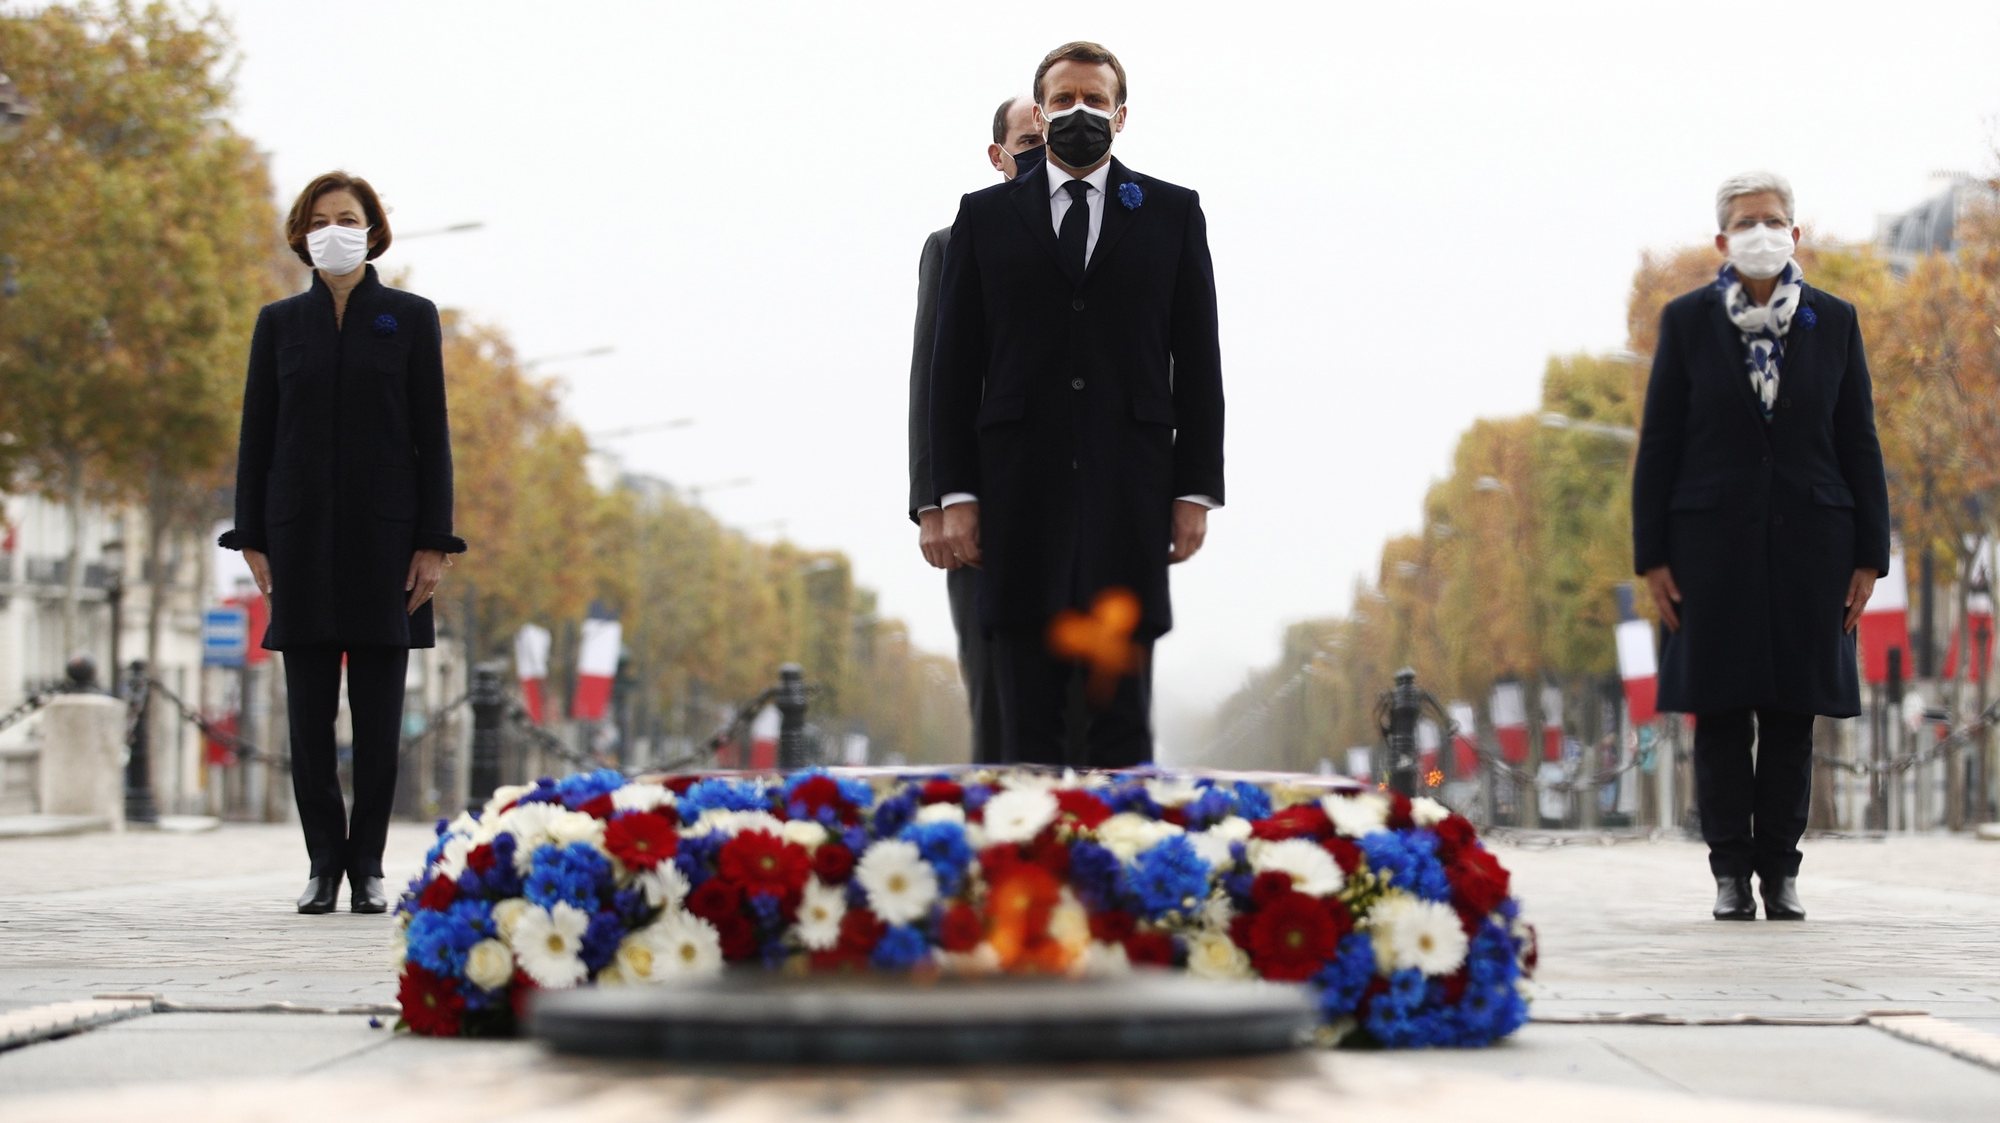 epa08812956 French President Emmanuel Macron (C) pays his repsects as French Prime Minister Jean Castex (rear C), French Junior Defence Minister Genevieve Darrieussecq (R) and French Defence Minister Florence Parly (L) stand behind during a ceremony at the Arc de Triomphe in Paris, France, 11 November 2020, as part of the commemorations marking the 102nd anniversary of the 11 November 1918 armistice, ending World War I (WWI).  EPA/YOAN VALAT / POOL